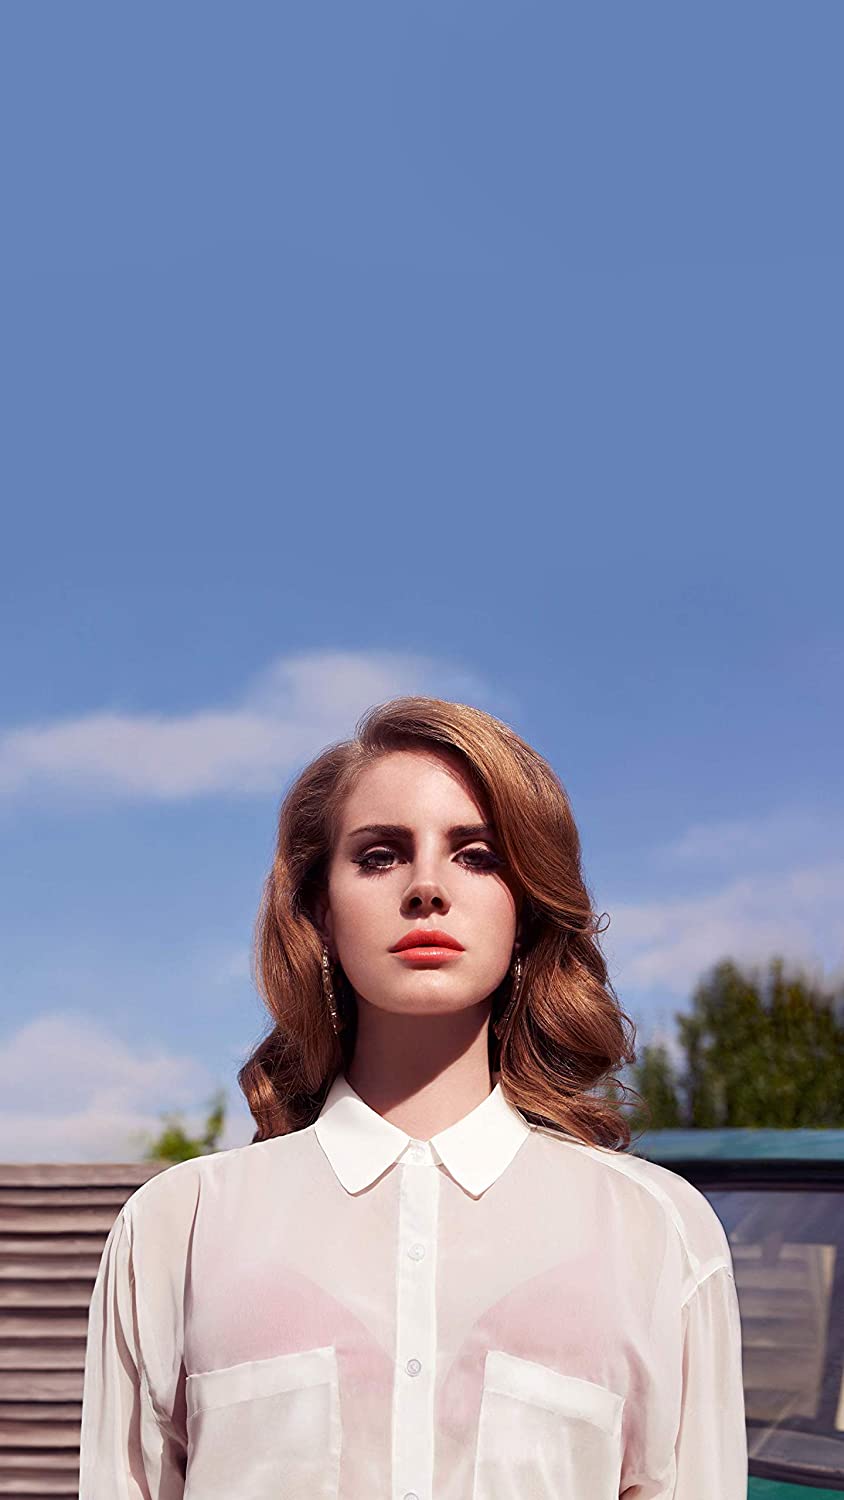 Lana Del Rey Poster Wall Print Pop Star Wall Decor Wallpaper Lana Del Rey Home Decor Gift for Her Gift for Him (M'' x 24''): Home & Kitchen